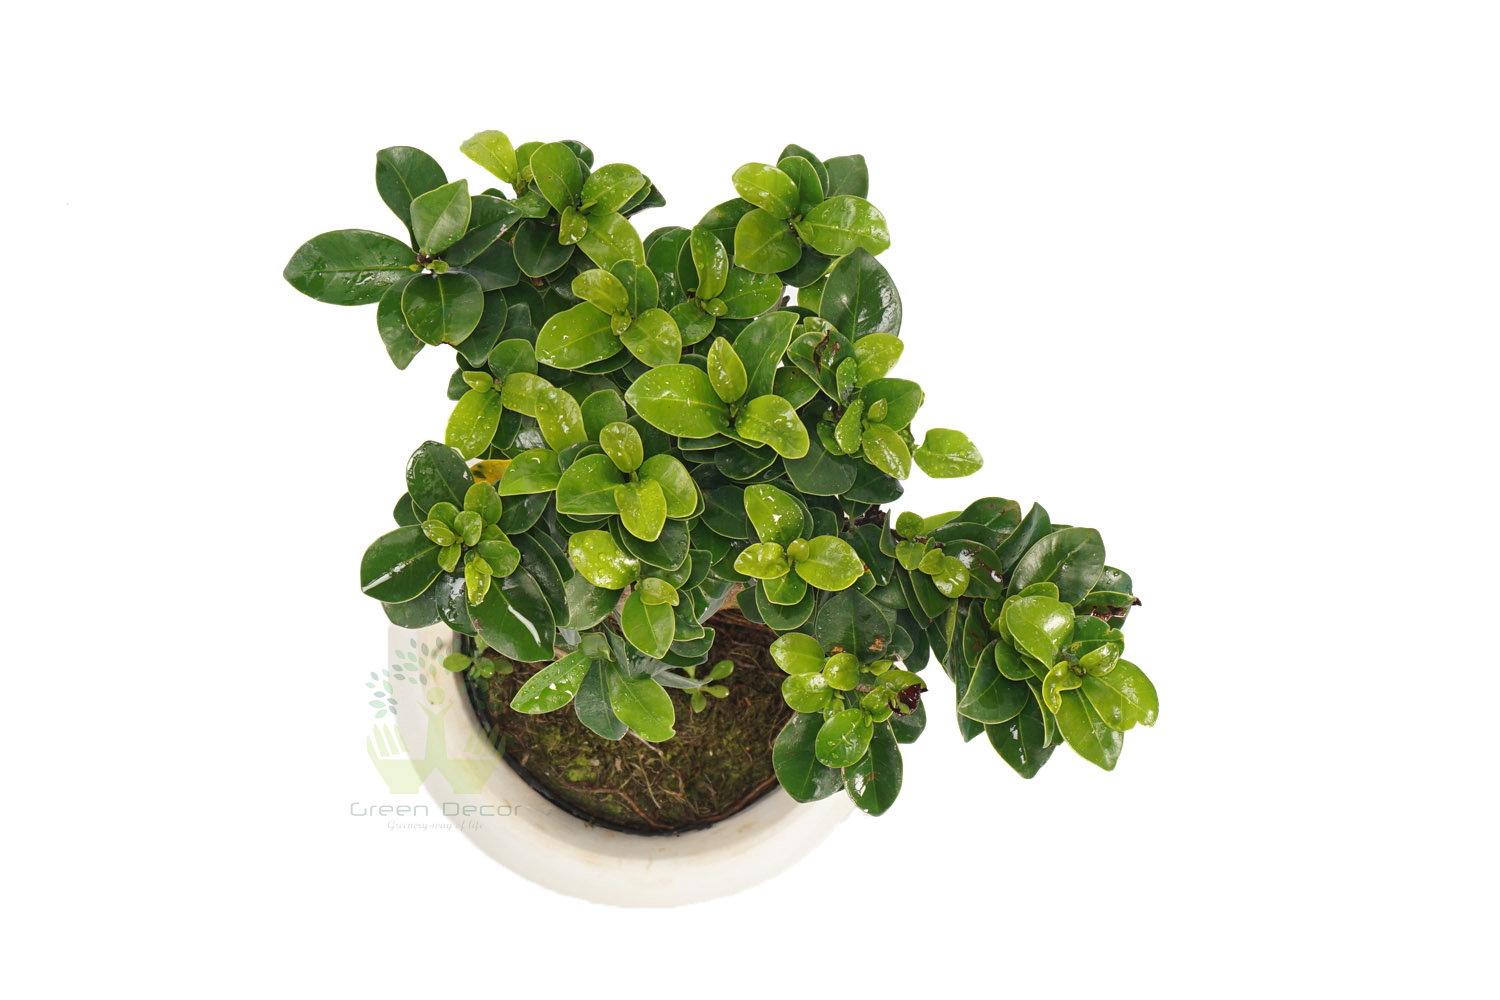 Buy Ficus Plants , White Pots and seeds in Delhi NCR by the best online nursery shop Greendecor.